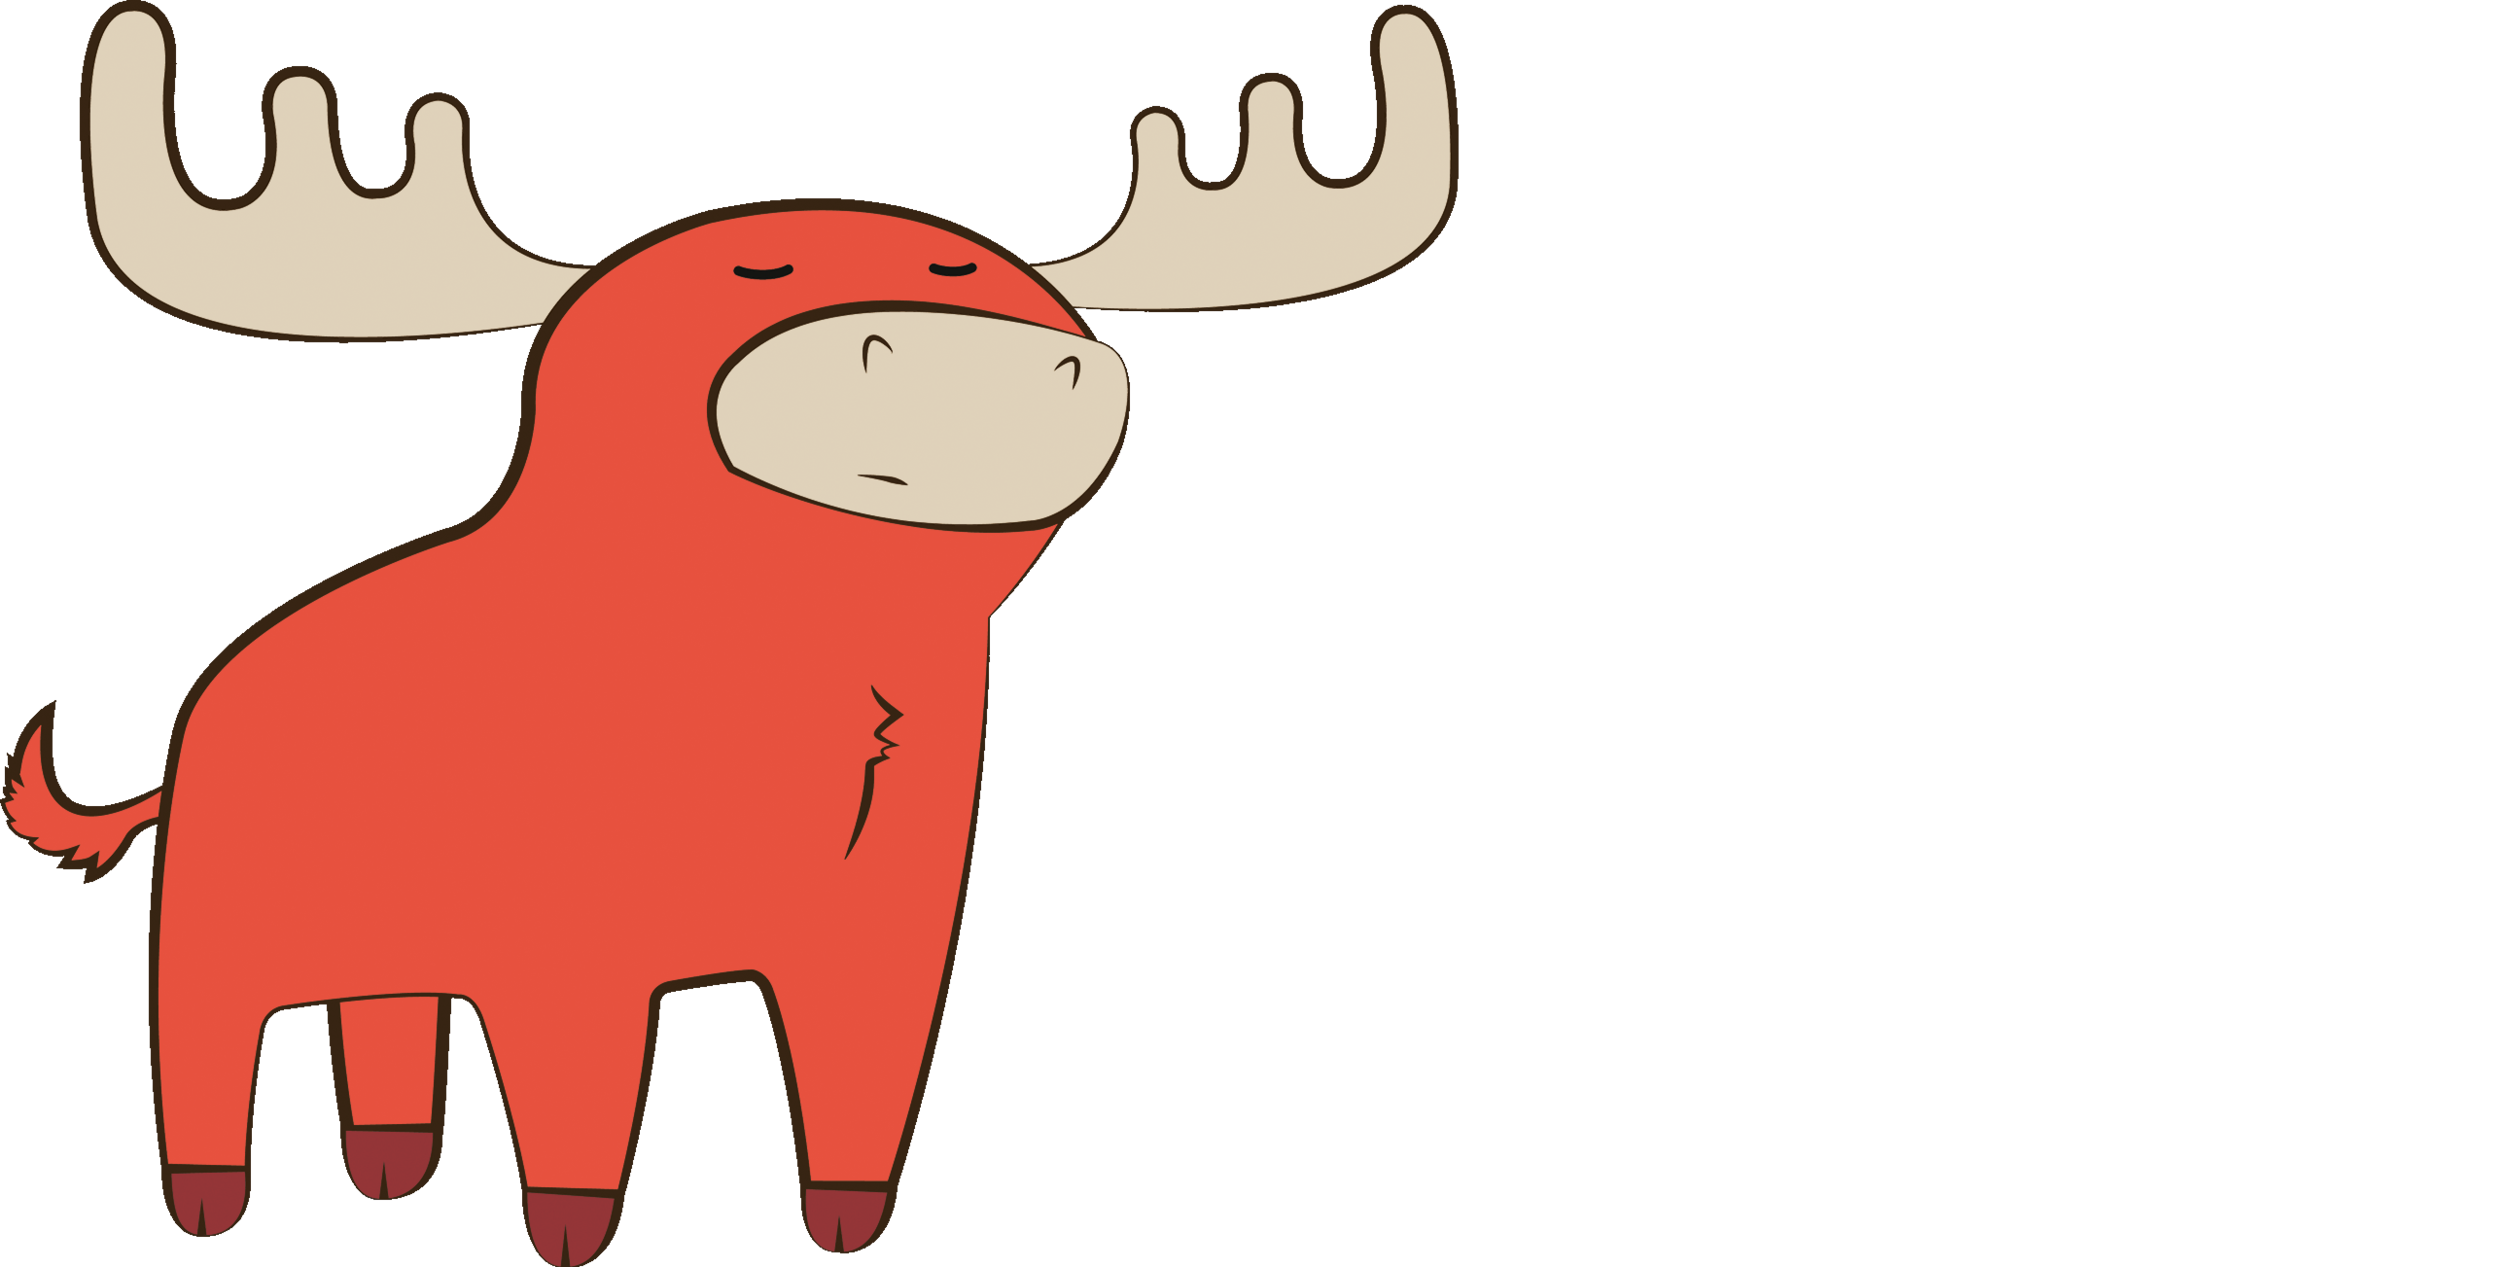 moose clipart muscle